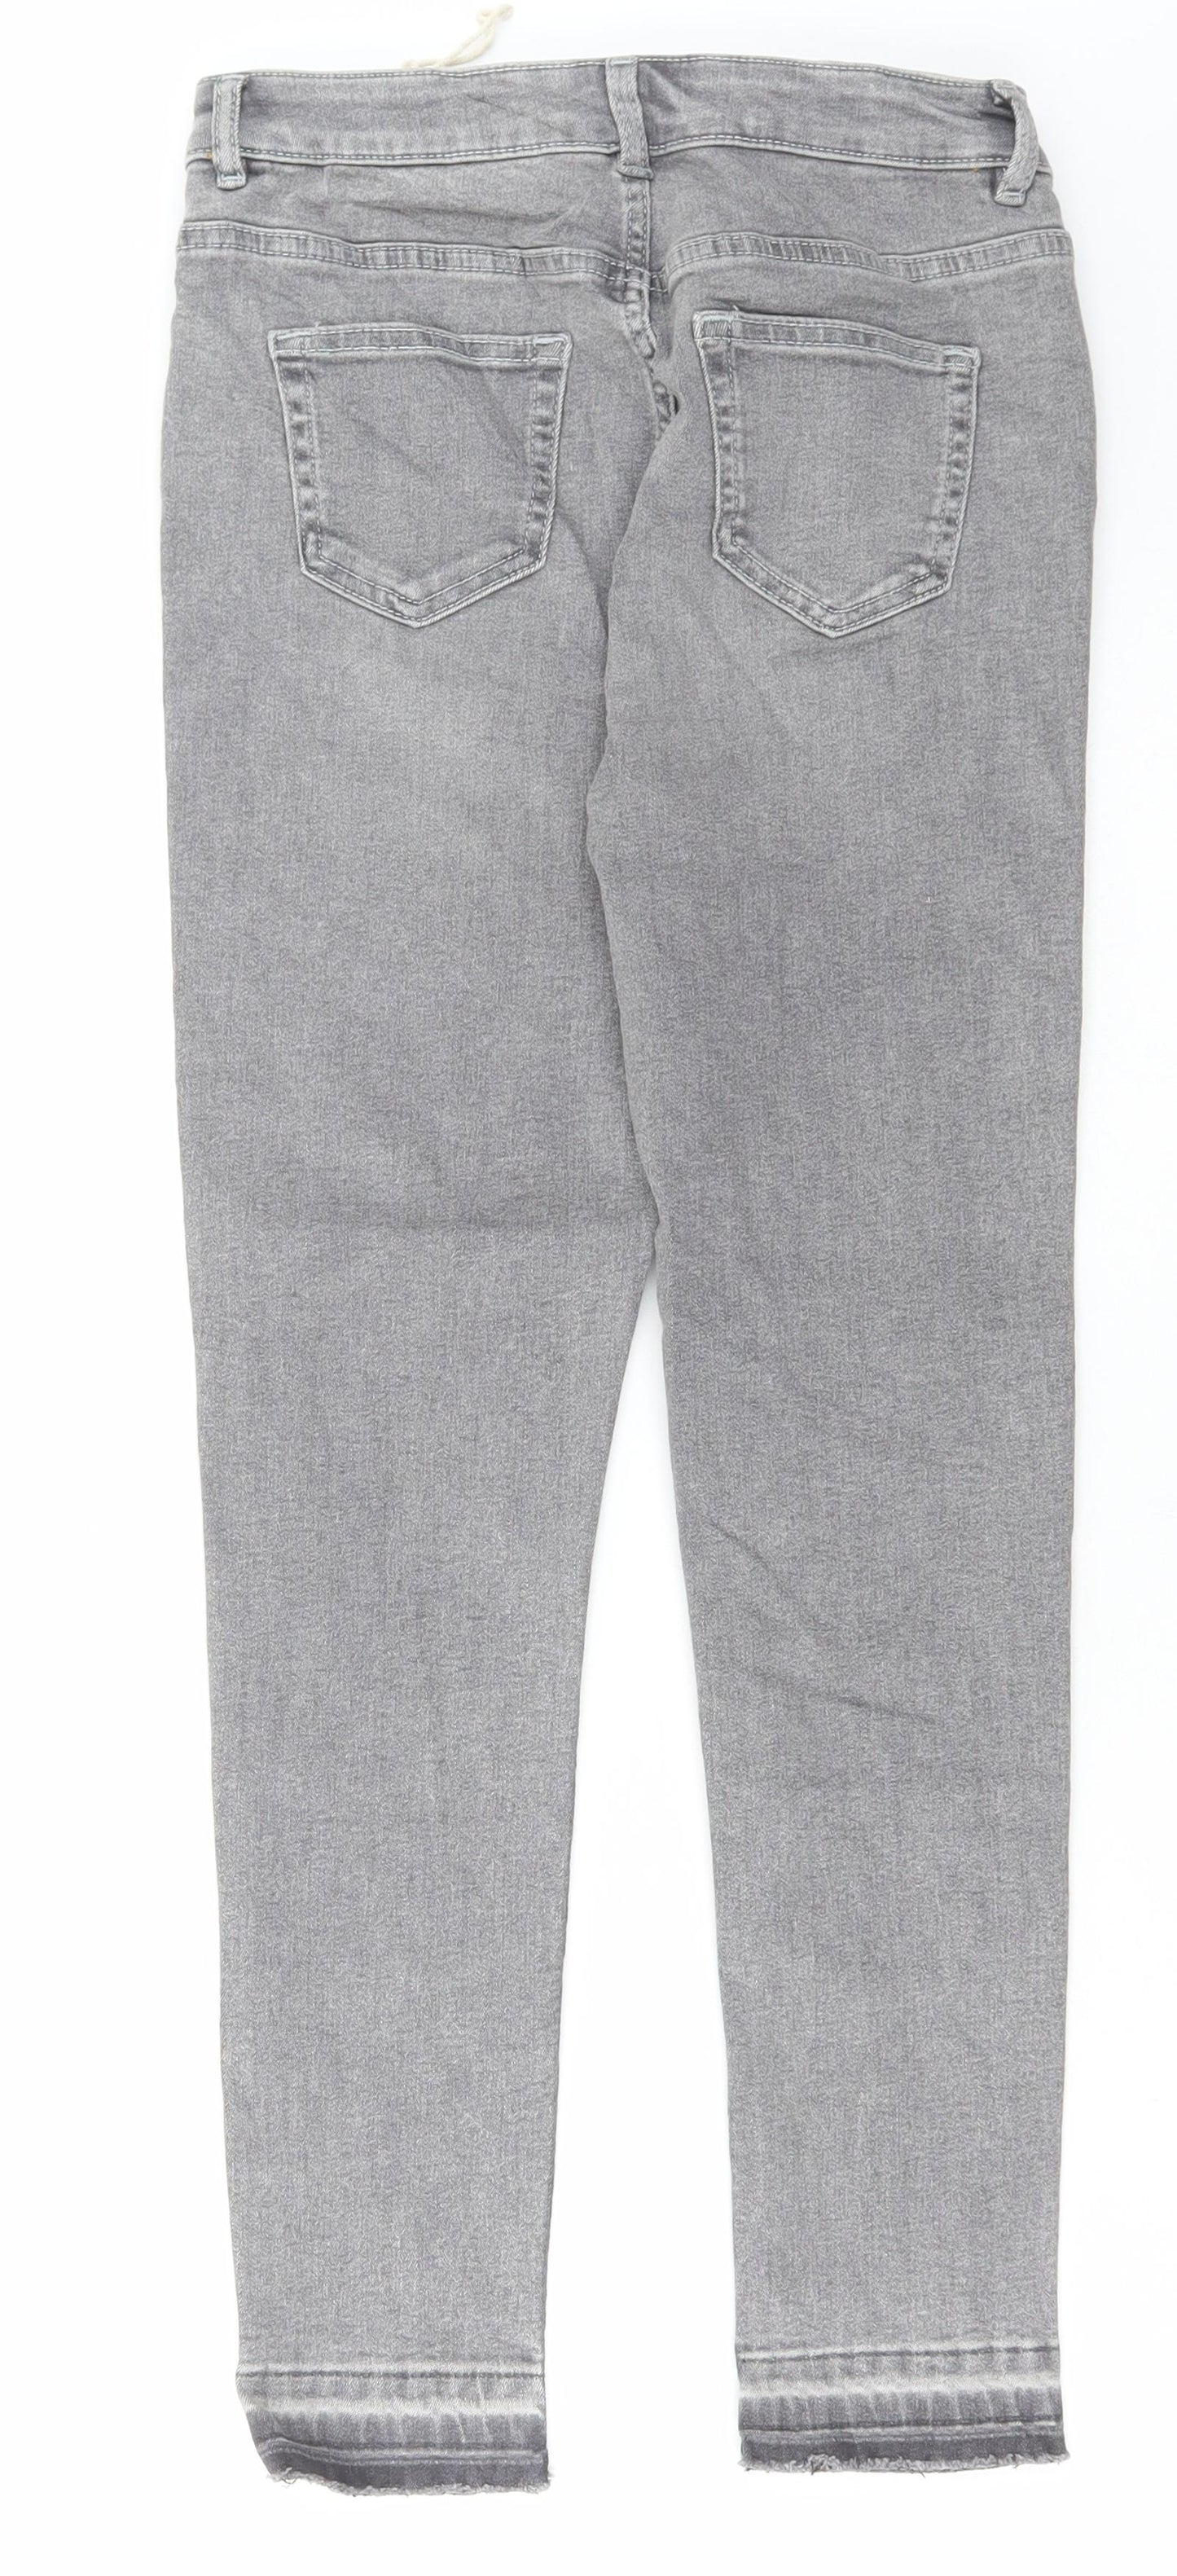 Marks and Spencer Girls Grey Cotton Skinny Jeans Size 11-12 Years Regular Button